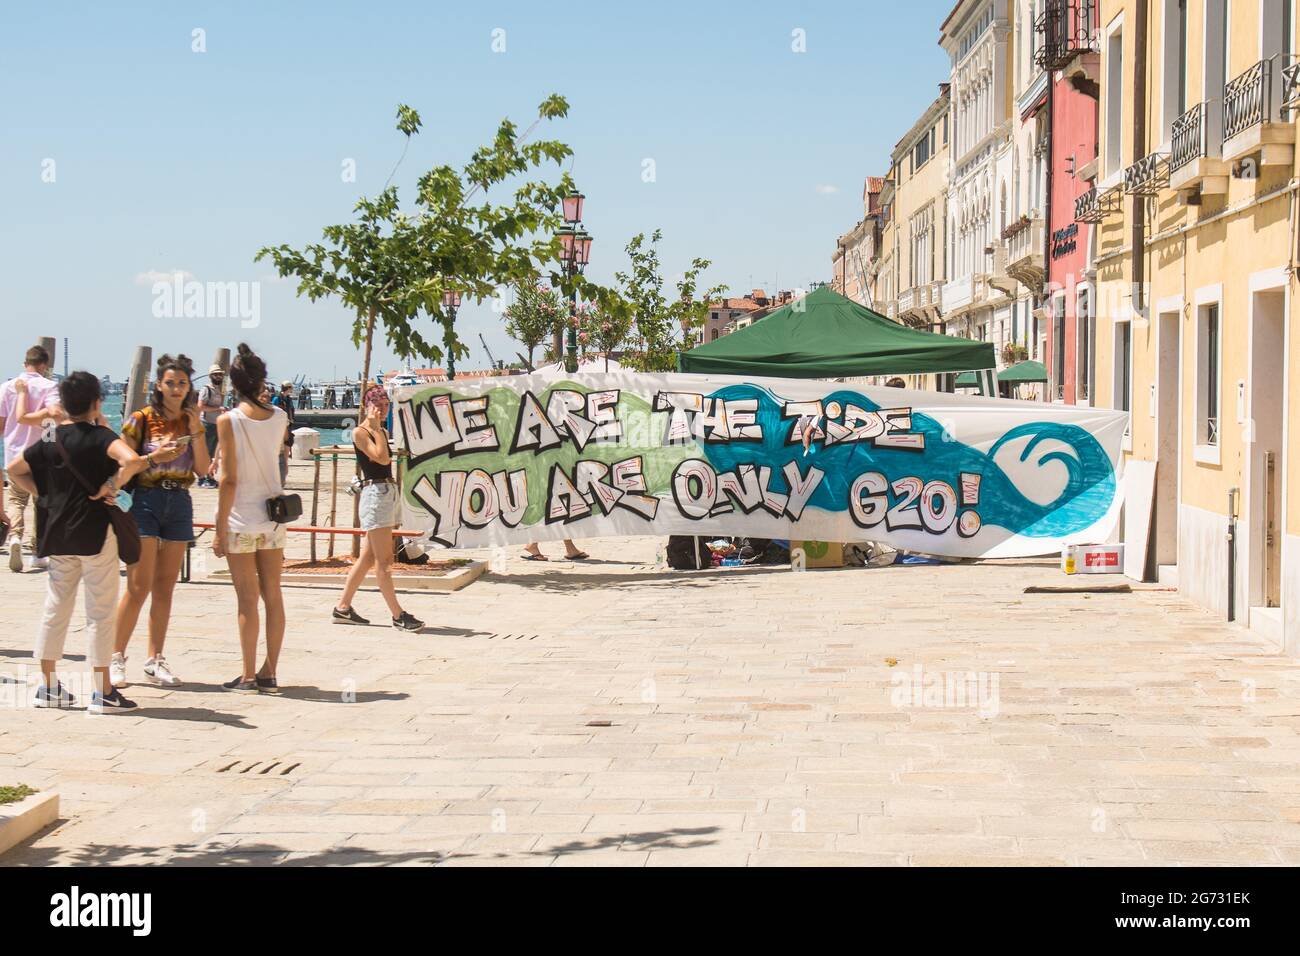 Venice, Italy. 10th July, 2021. Protestors wait ahead the demonstration 'We are the tide, you are only (G)20' on July 10, 2021 in Venice, Italy. For their third meeting under the Italian G20 presidency, on 9 and 10 July 2021, G20 Finance Ministers and Central Bank Governors (FMCBG) gathered in Venice for a two-day summit on issues related to global economy and health © Simone Padovani / Awakening / Alamy Live News Stock Photo